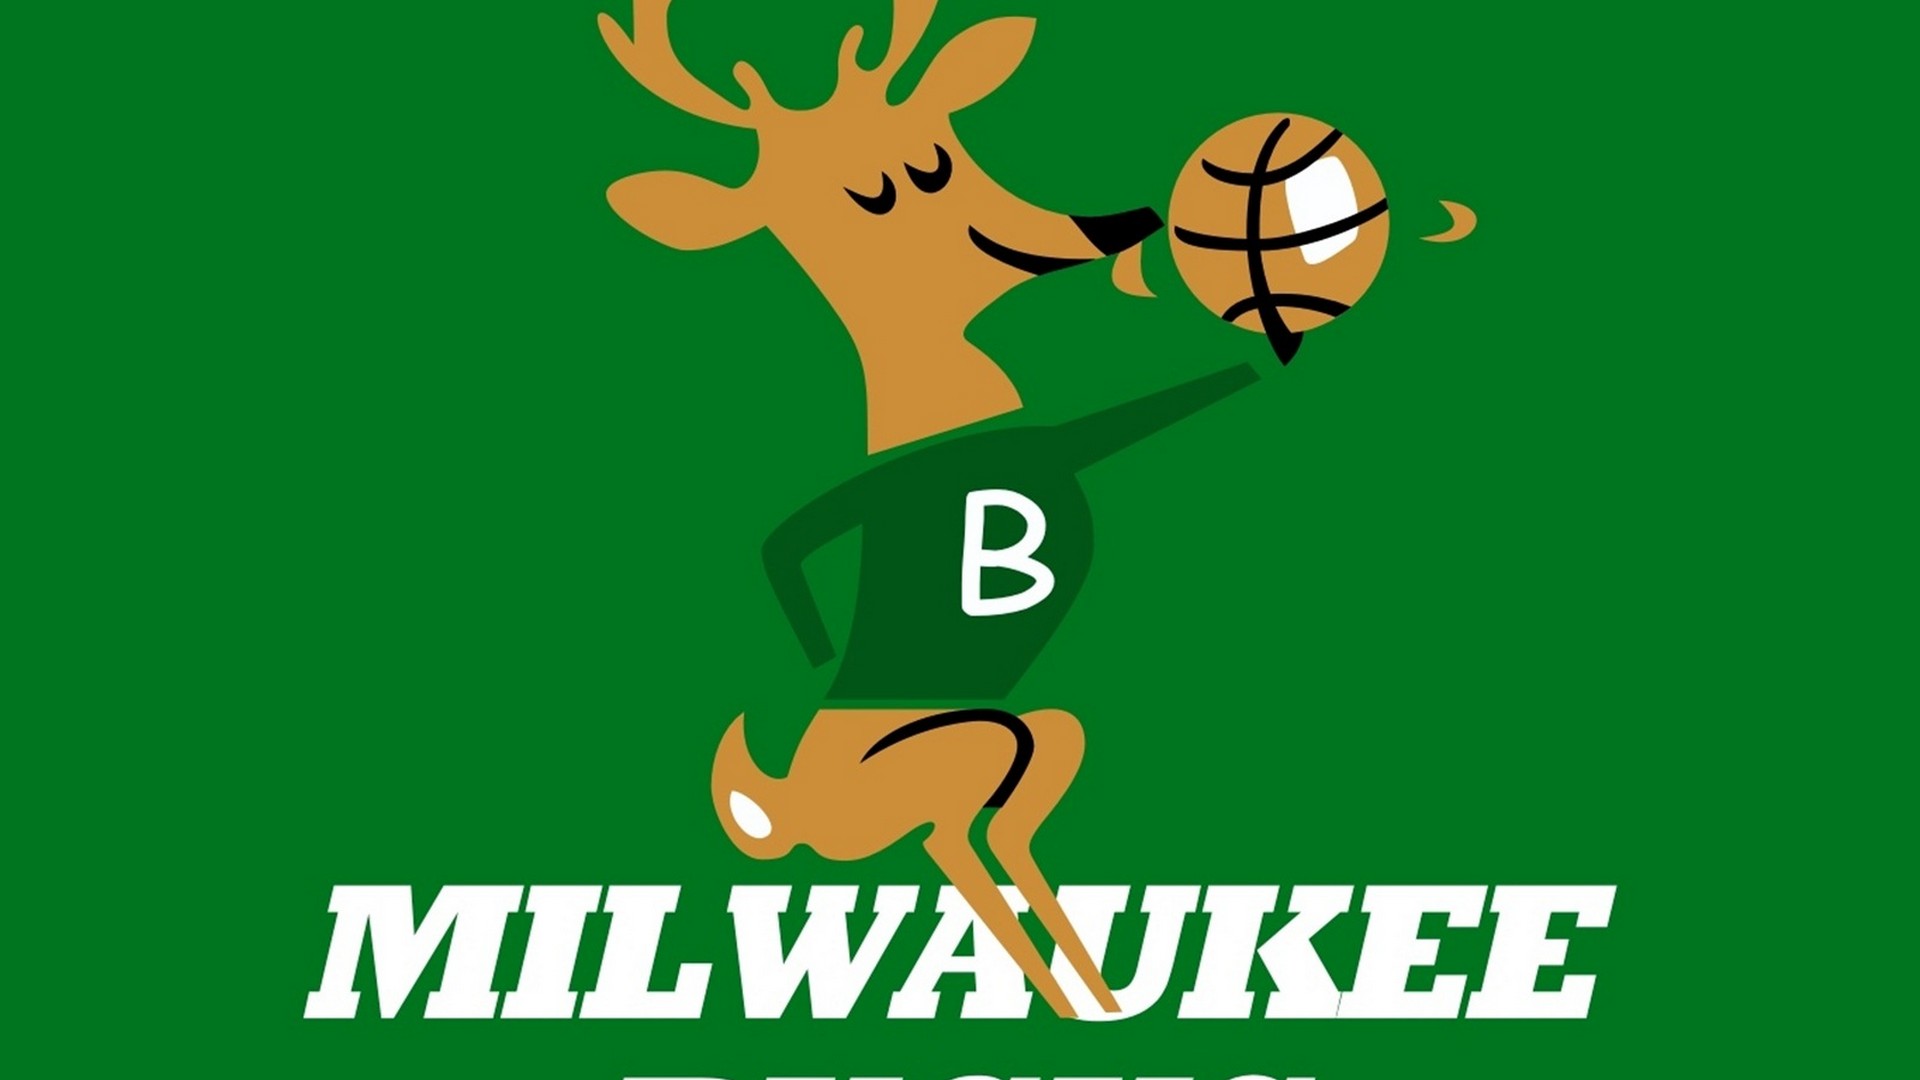 Milwaukee Bucks Wallpaper For Mac Backgrounds with high-resolution 1920x1080 pixel. You can use this wallpaper for your Desktop Computer Backgrounds, Windows or Mac Screensavers, iPhone Lock screen, Tablet or Android and another Mobile Phone device